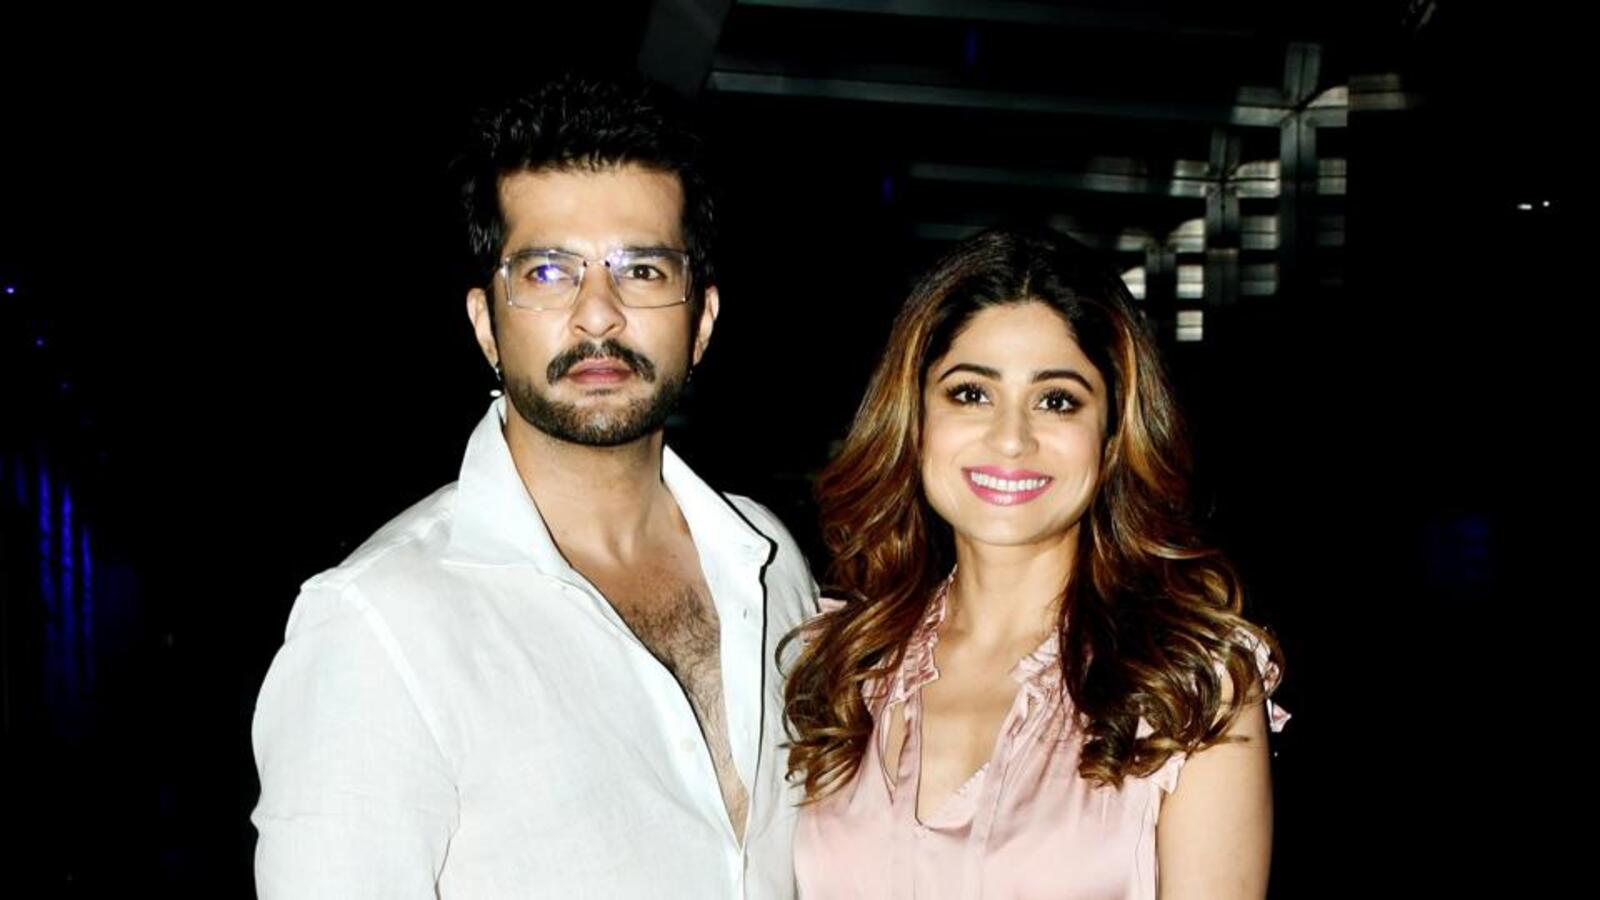 Raqesh Bapat on his bond with Shamita Shetty: Would not name it relationship; She is a dear friend